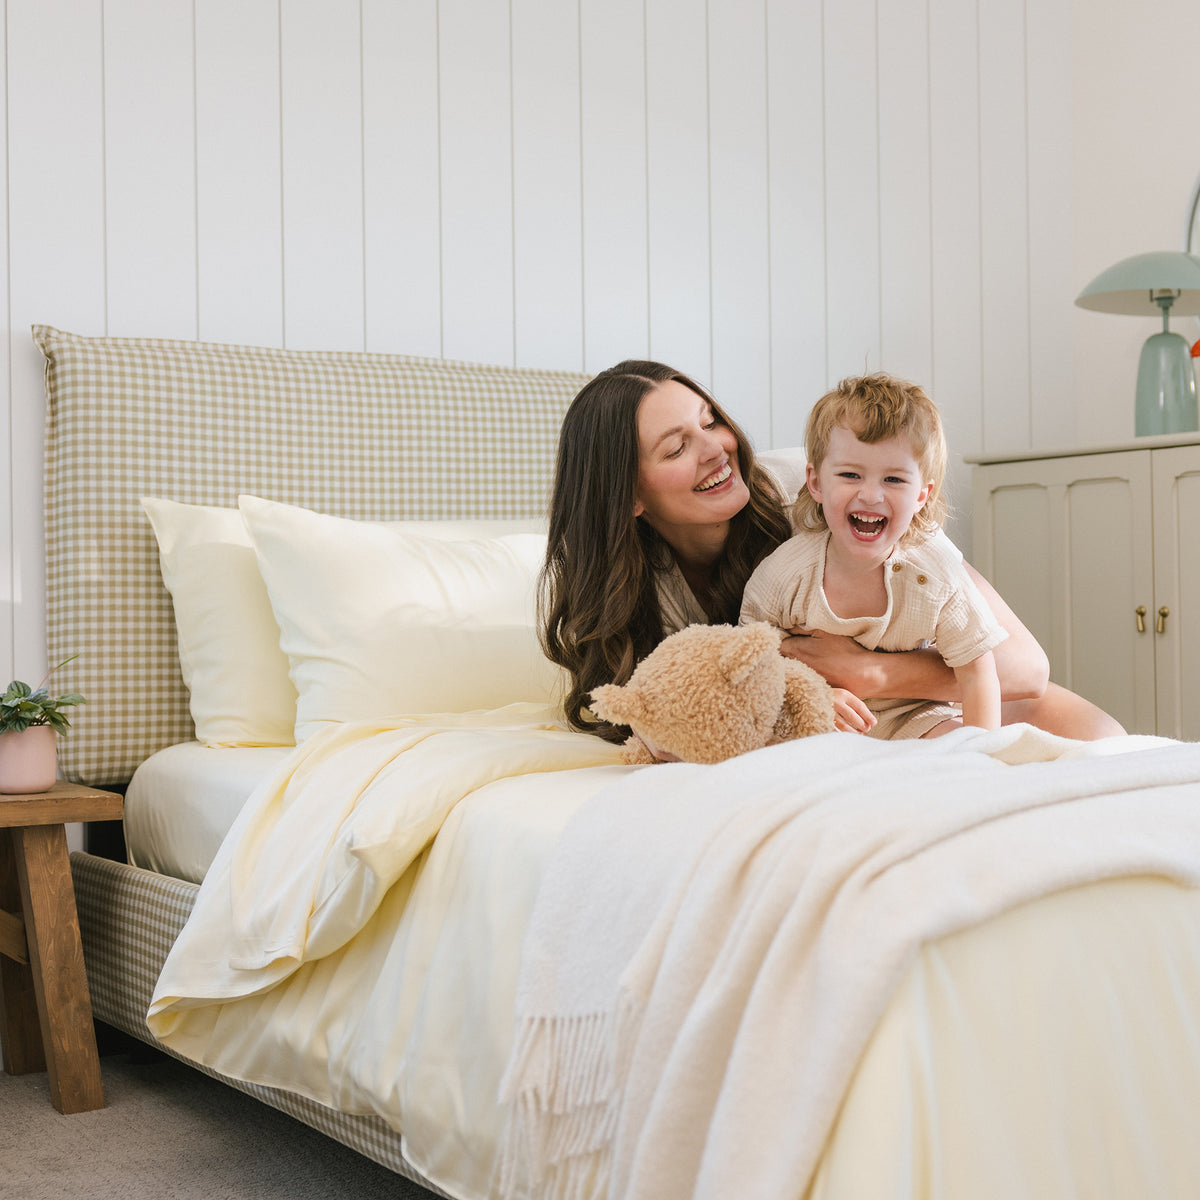 Women with boy smiling on bed with lemonade bedding |Color:Lemonade